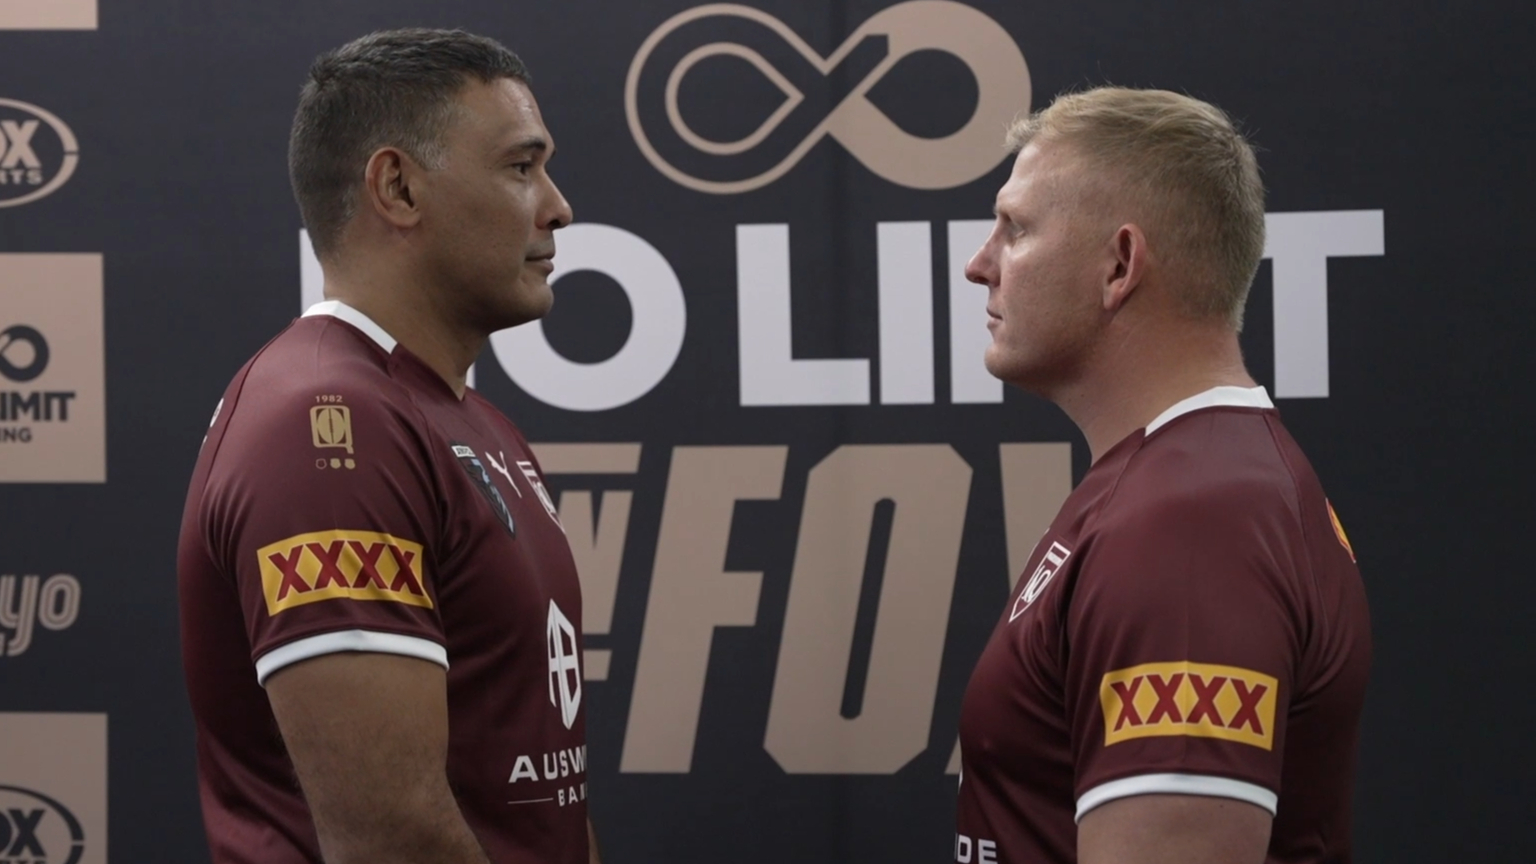 Ben Hannant explains why he wanted to get back in the ring